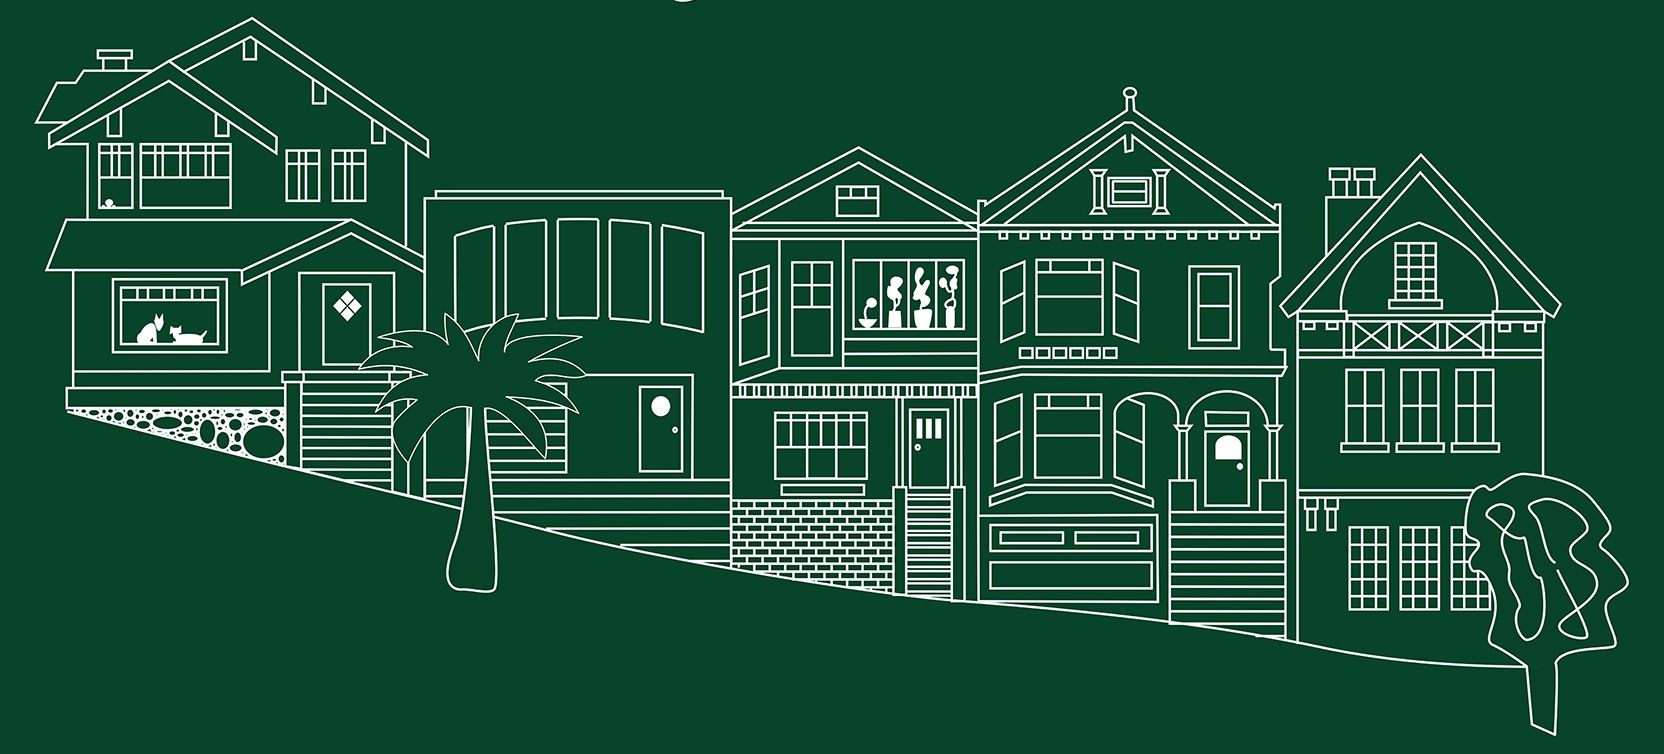 Friends of Noe Valley green color poster Sketch